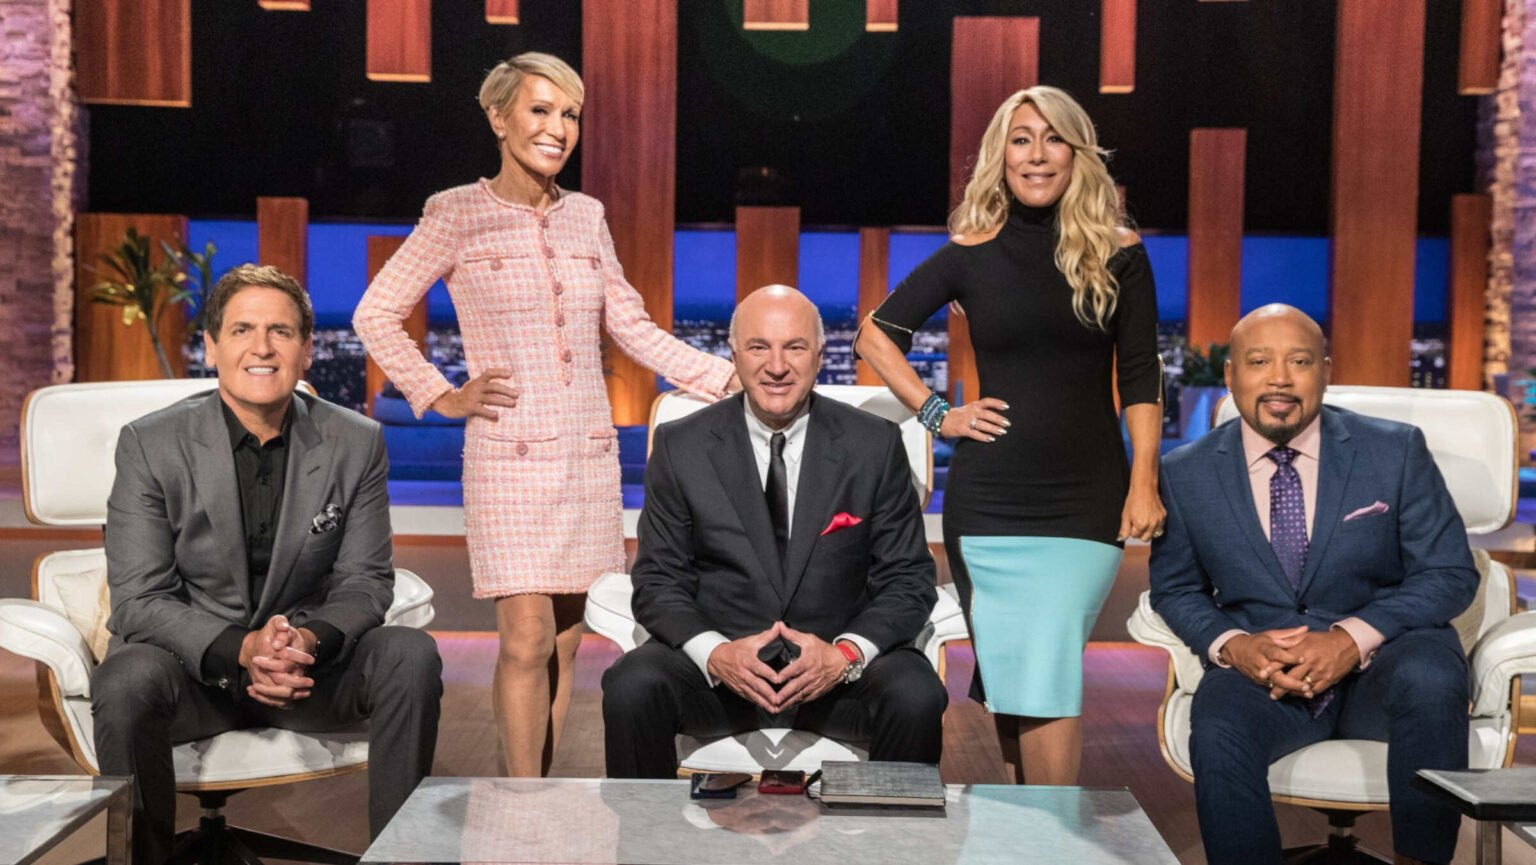 Kevin Harrington may be in some hot water after 'Shark Tank' entrepreneurs accused the duo of fraud. Are they guilty? Wade further into this story here.